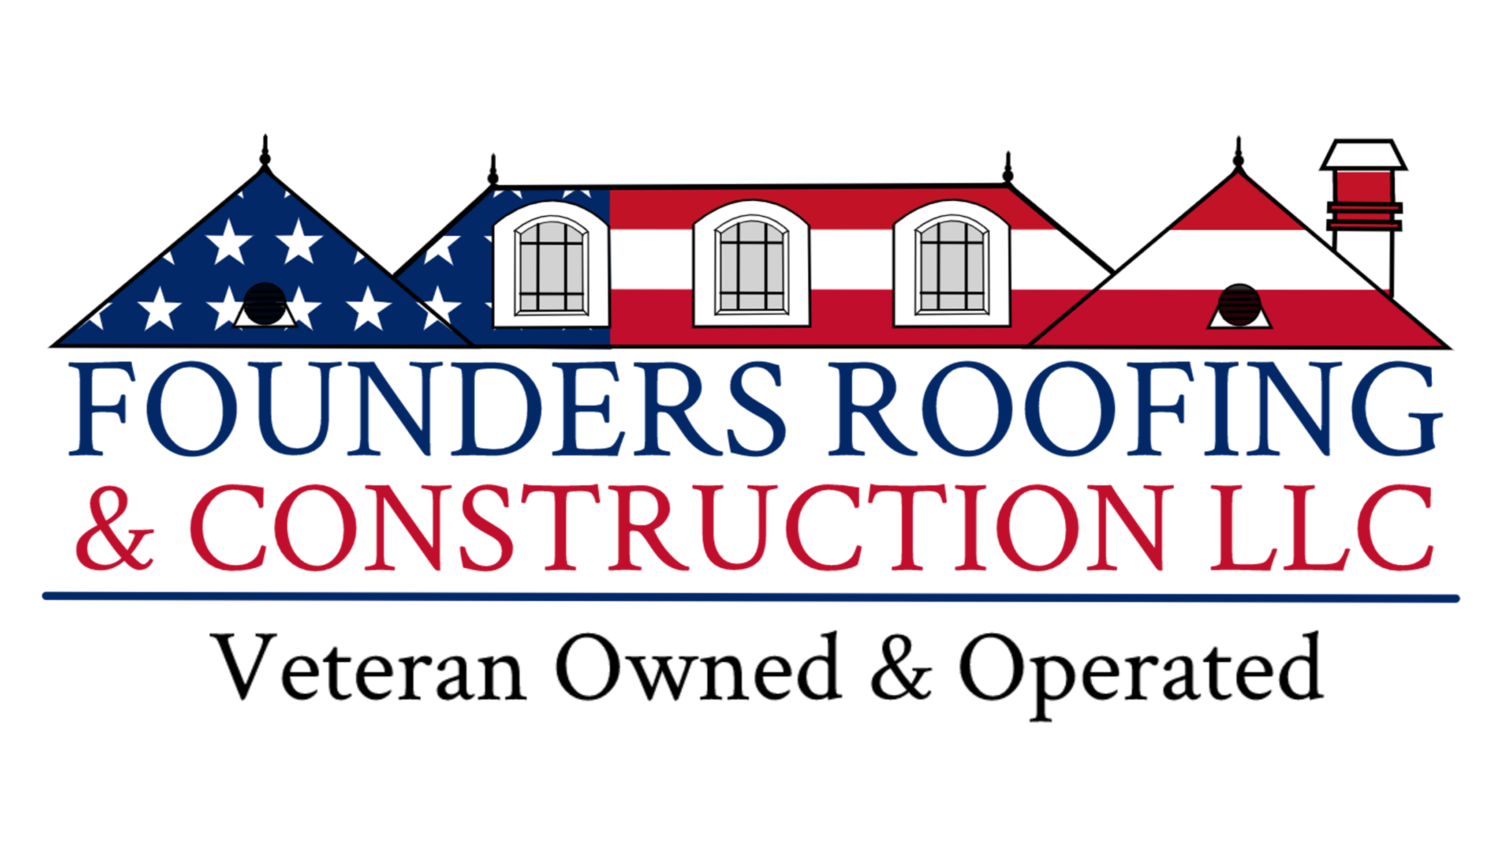 Founders Roofing & Construction LLC Reveals Roof Safety Tips and Best Practices for Preserving and Maintaining Roof